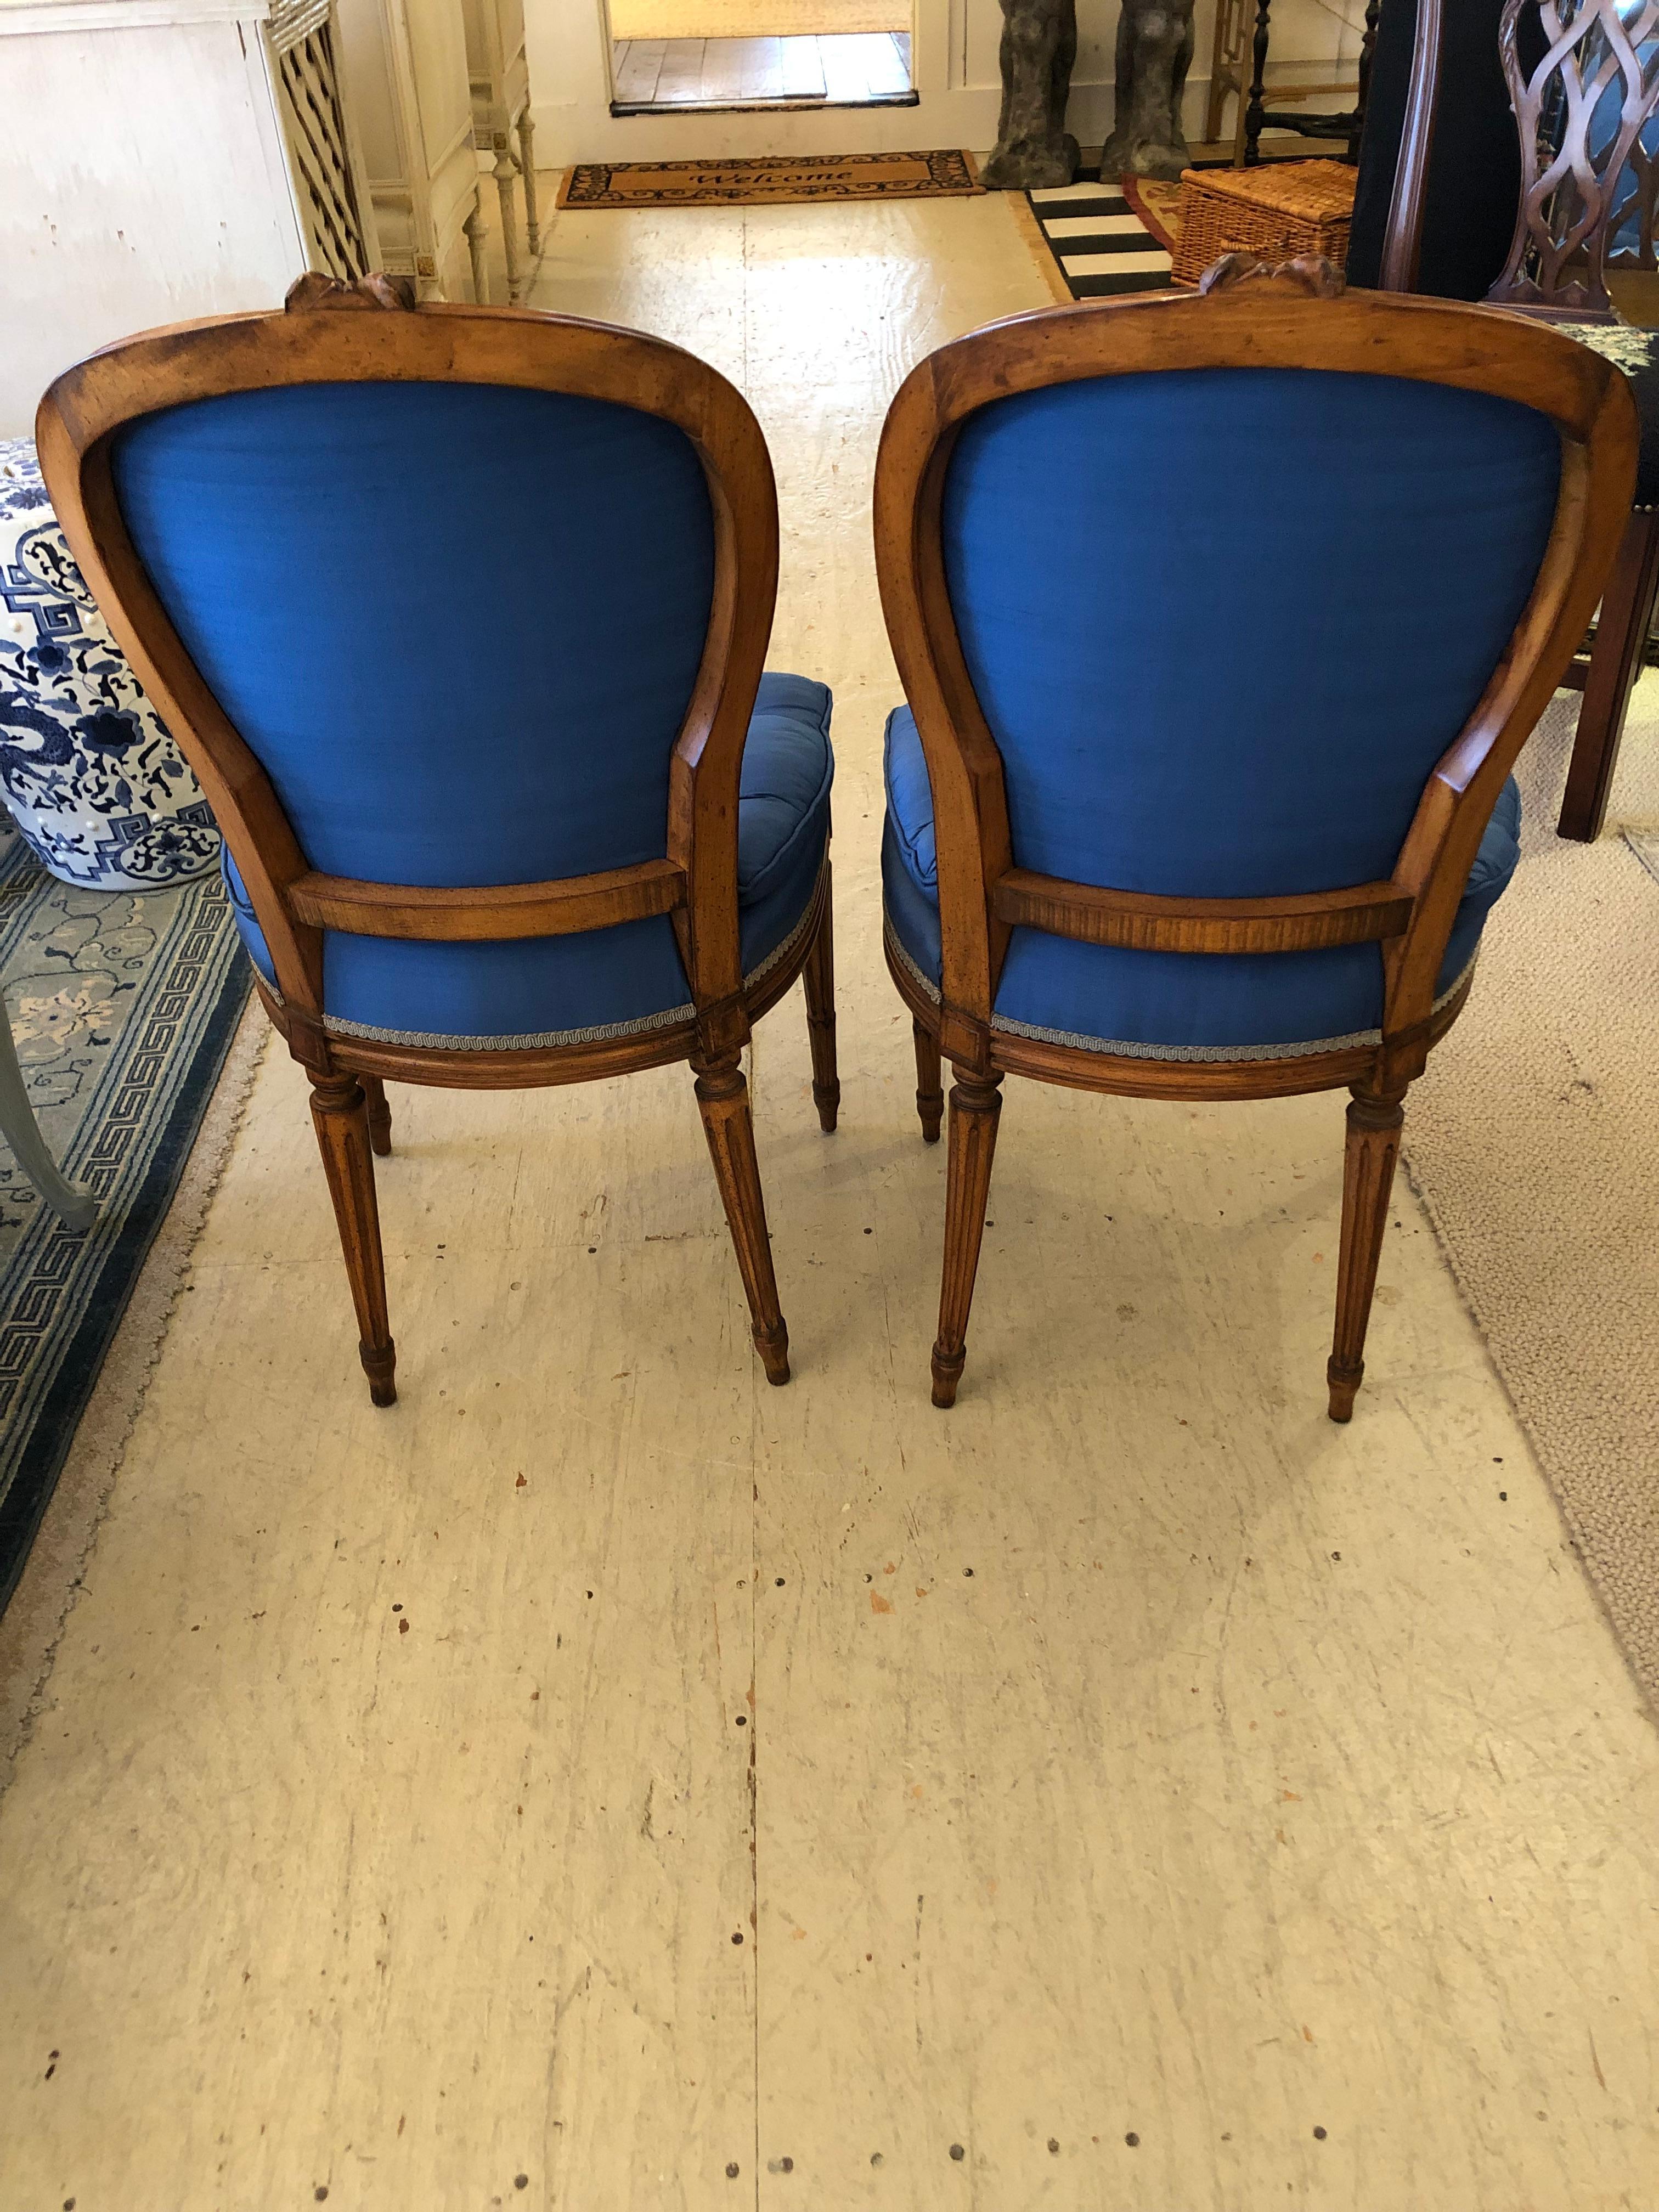 Very elegant pair of antique salon or side chairs having French Louis XVI style carved wood frames and striking cobalt blue upholstery. Tufted pillow top seat cushions are attached and plush.
JG